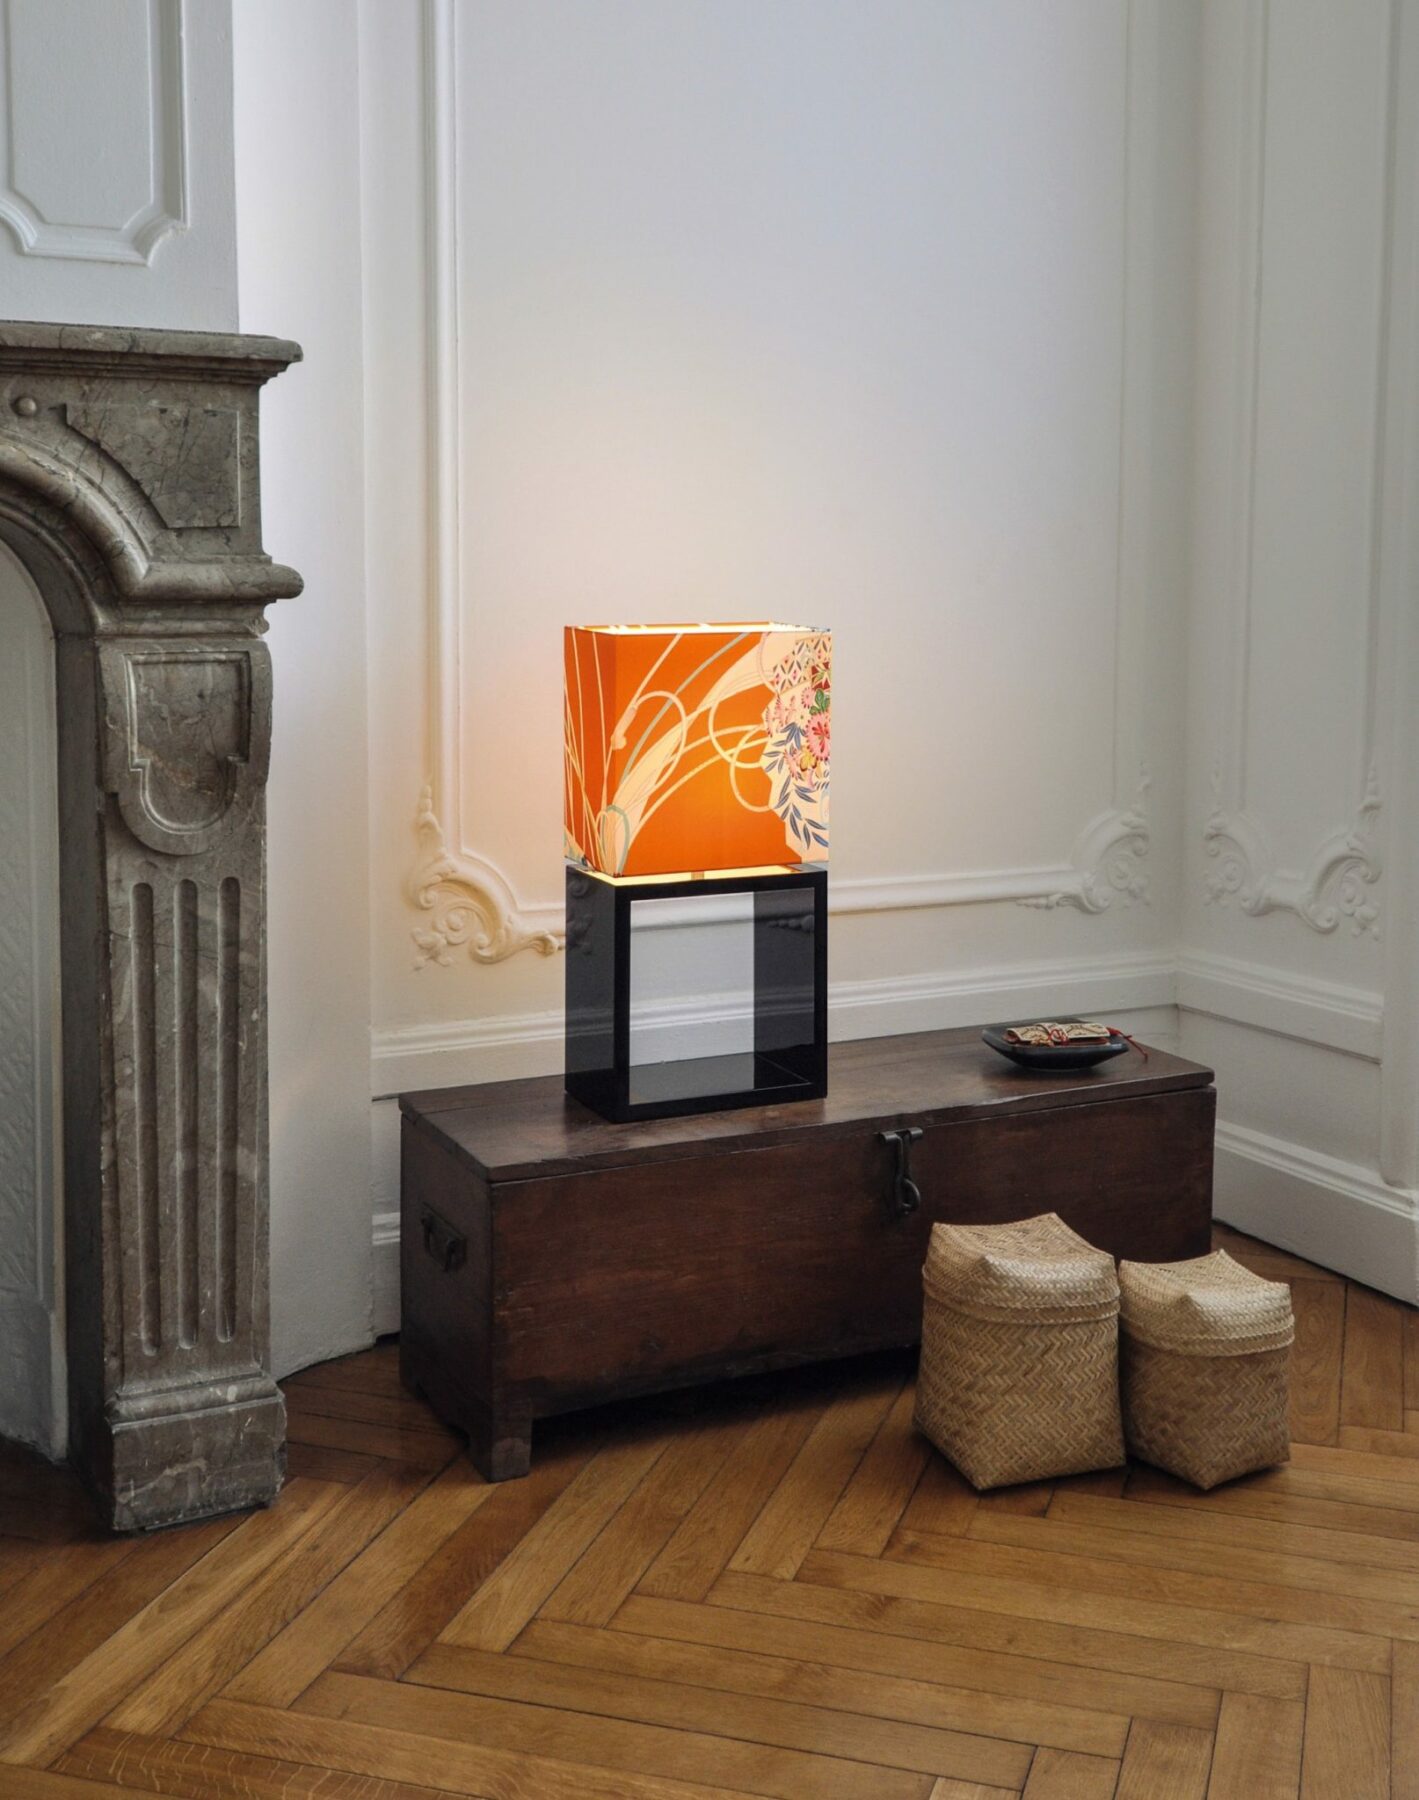 The GATE SAISO table lamp in an upscale flat in an old building decorated with stucco.